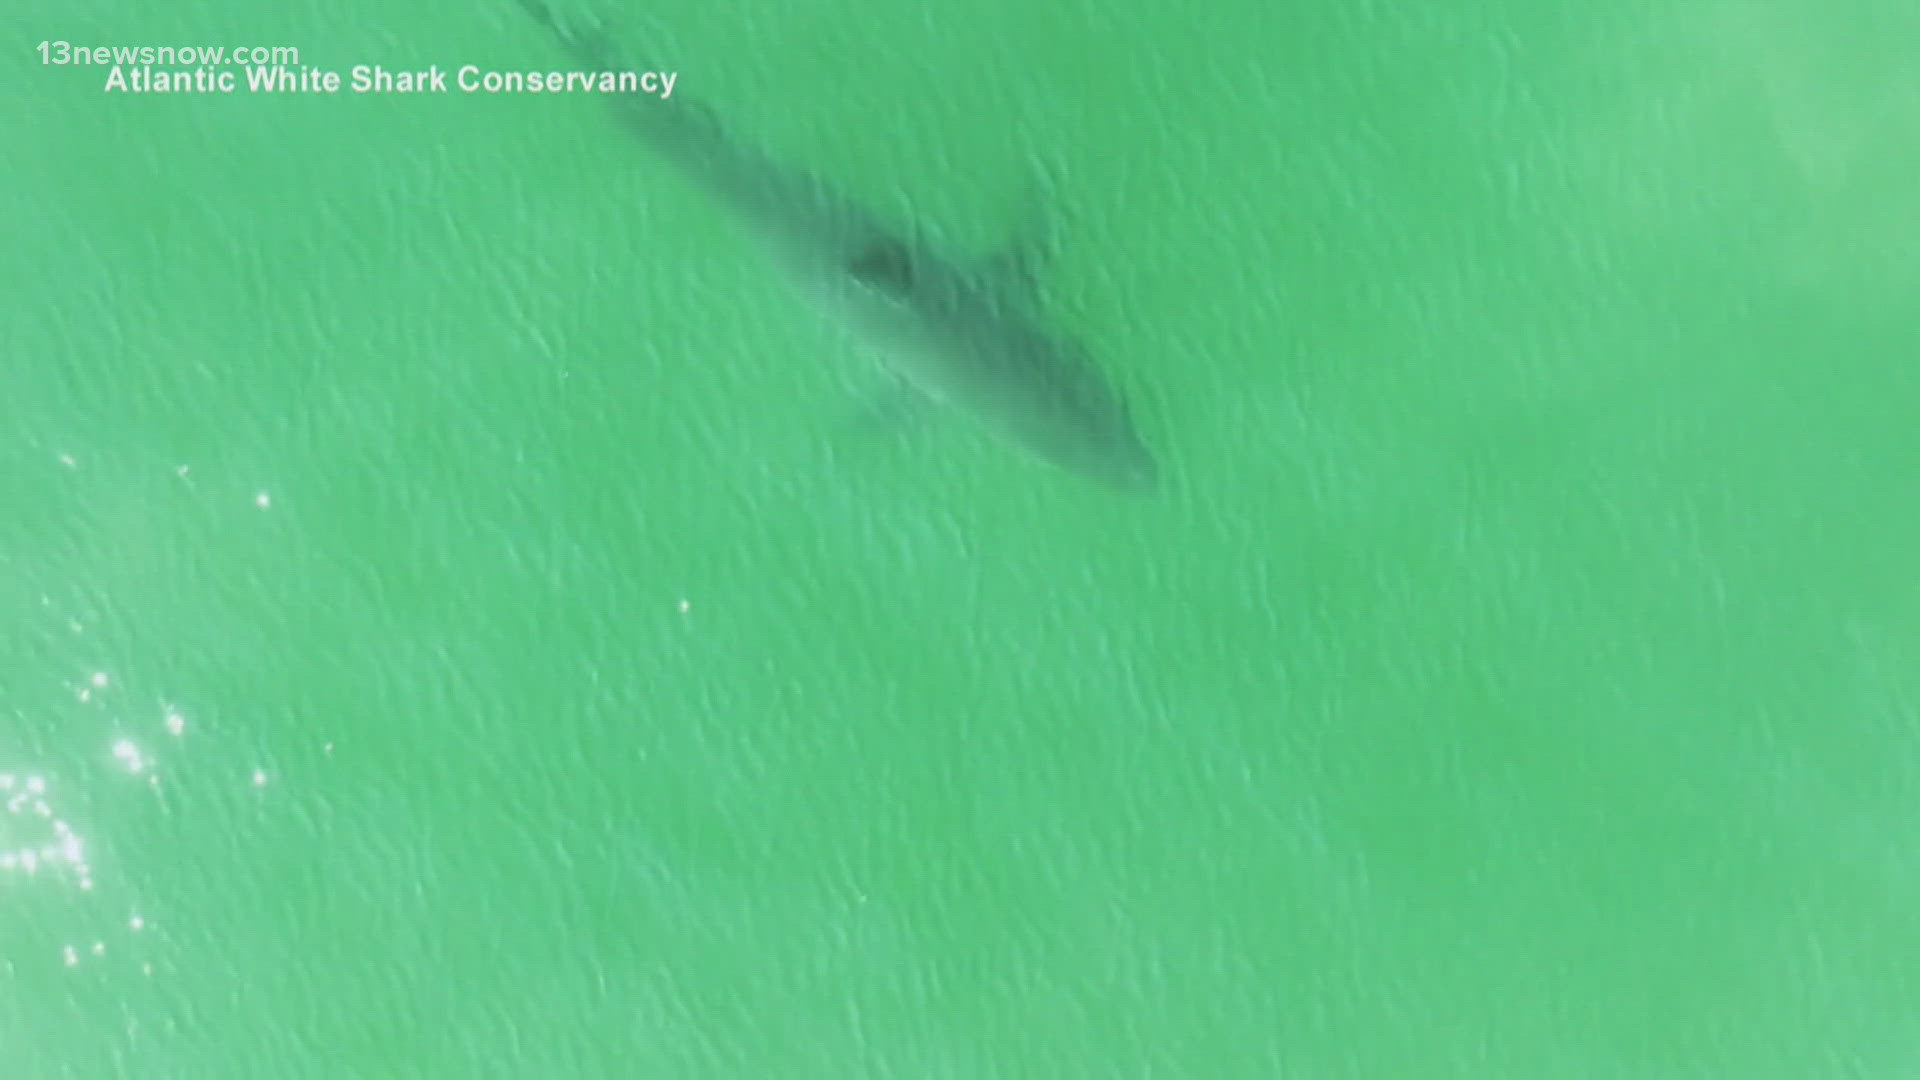 Officials are warning beachgoers this summer to be careful after a series of shark attacks across the country have sent multiple victims to the hospital.